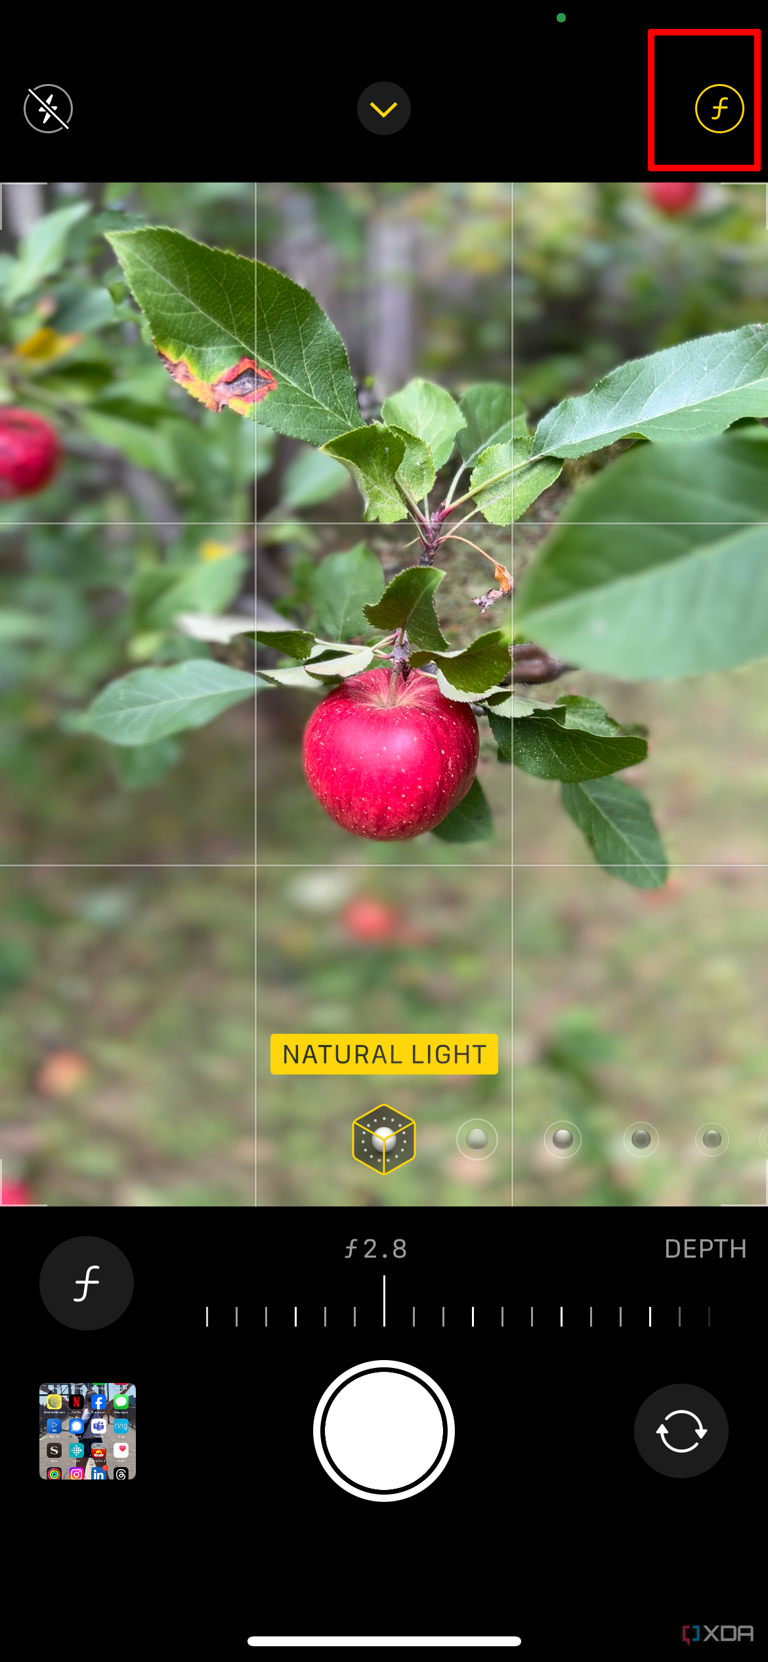 The iPhone camera open on Portrait mode showing a photo of an apple and the F at the top selected.